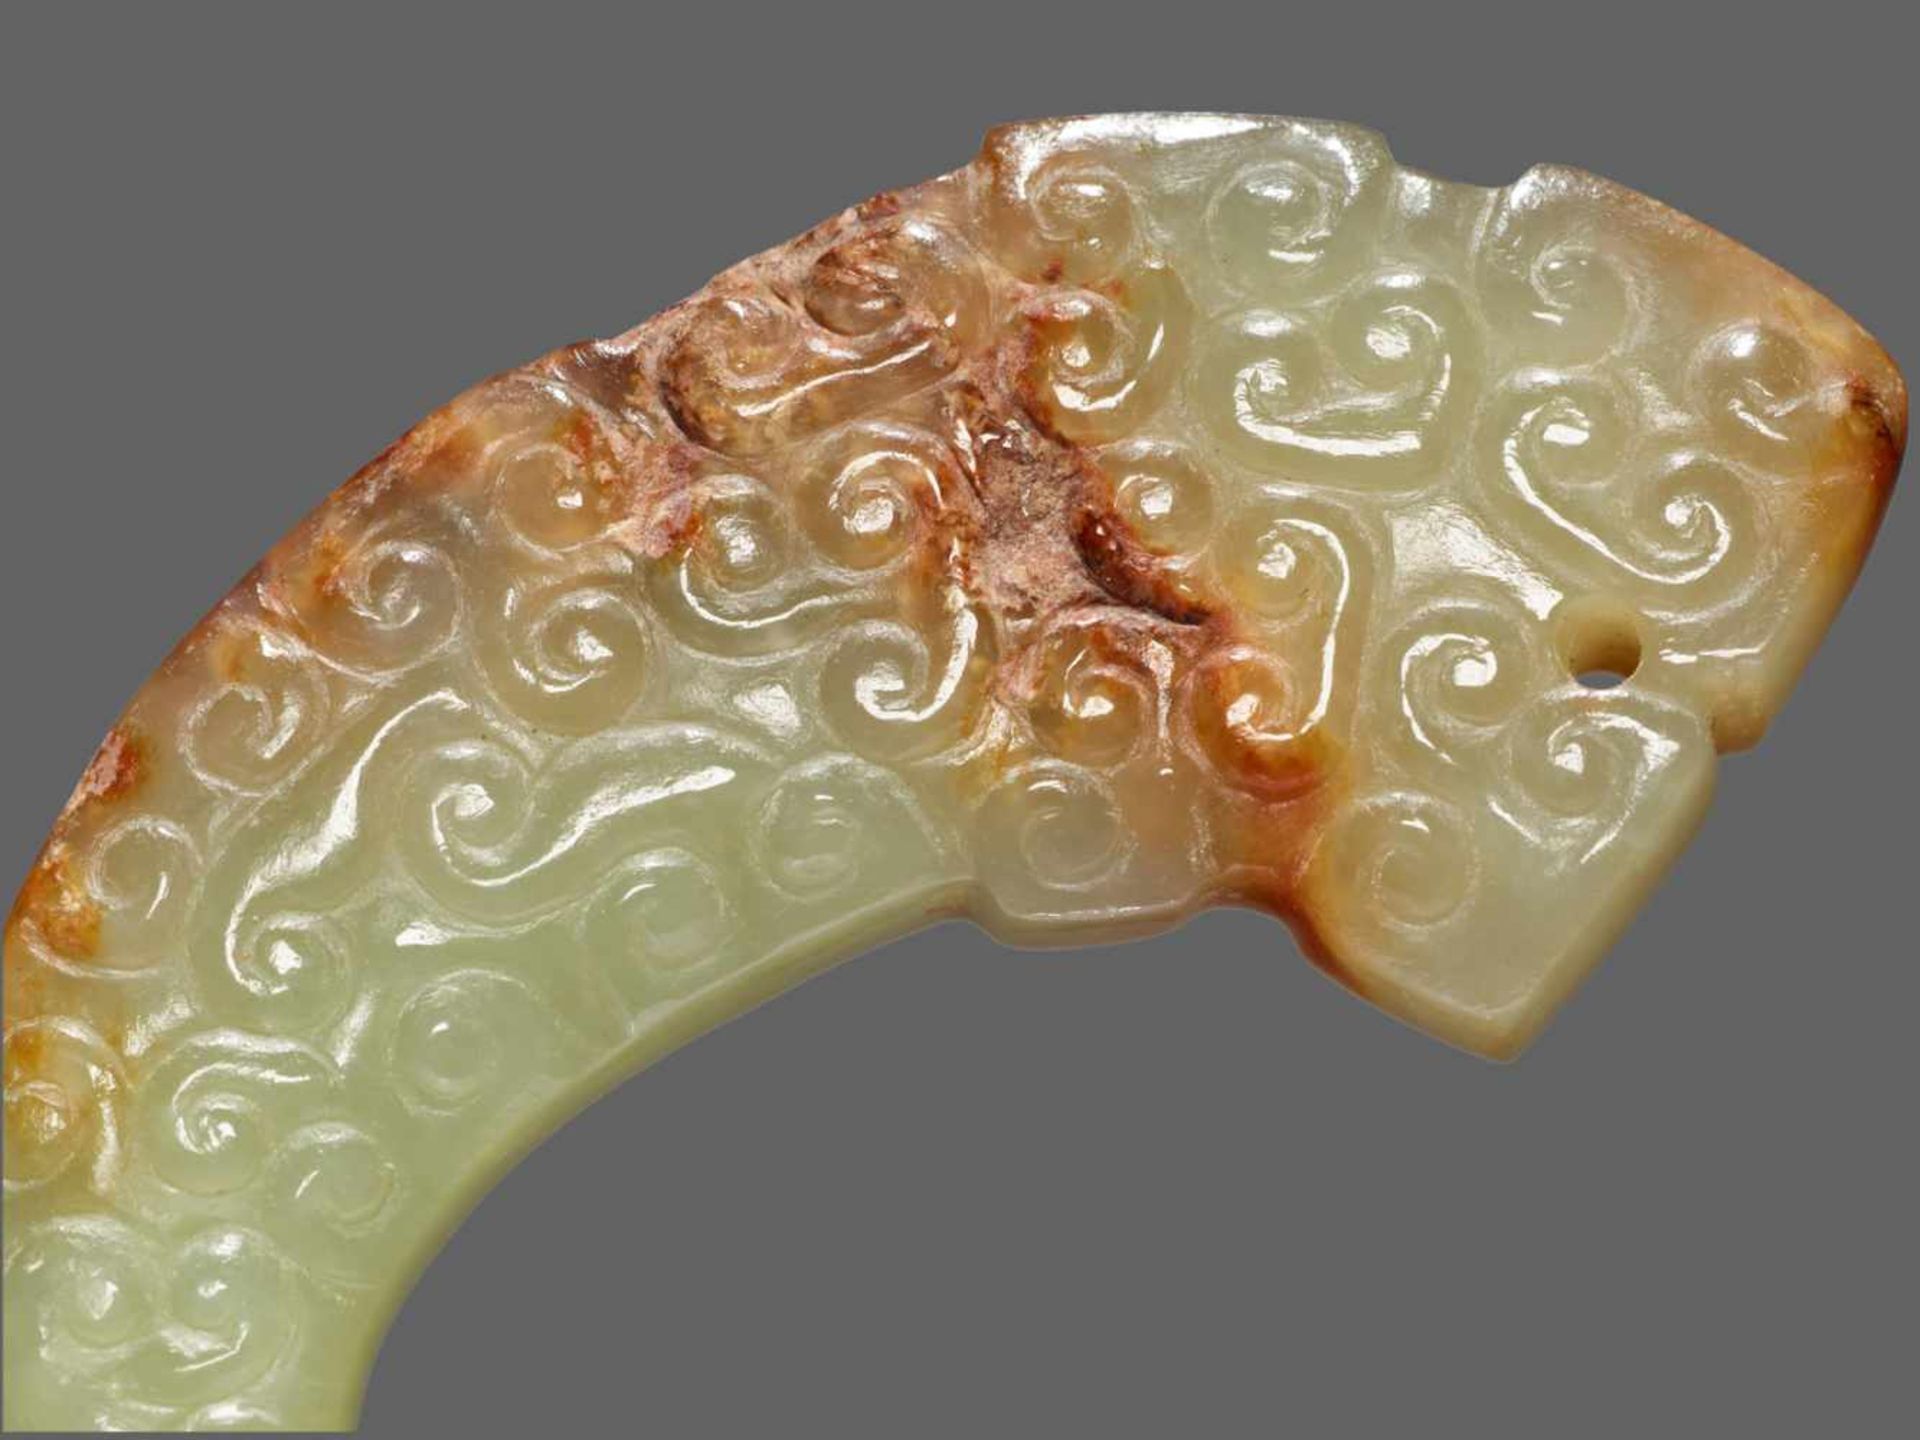 A FINE TINY DRAGON-SHAPED PENDANT IN HIGHLY POLISHED LIGHT GREEN JADE Jade. China, Eastern Zhou, - Image 5 of 8